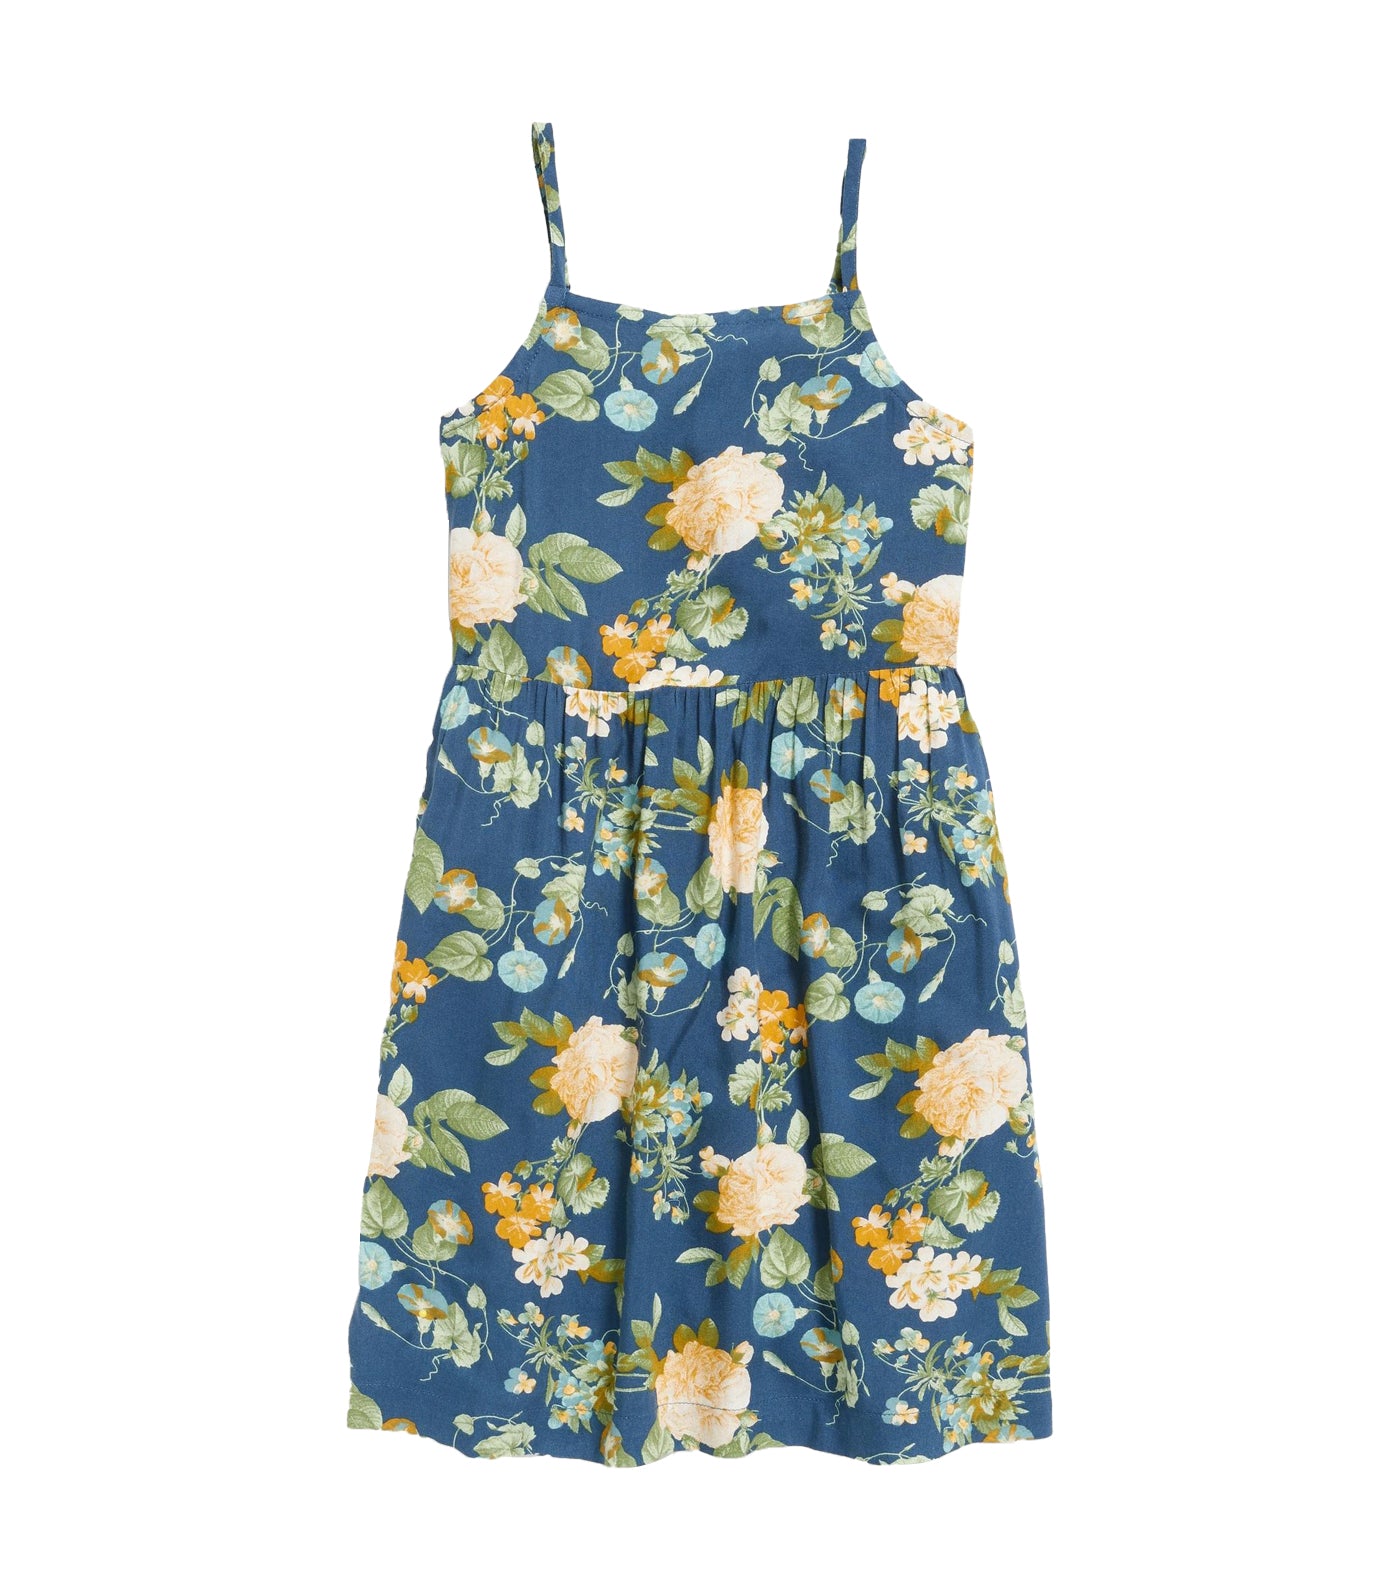 Printed Fit & Flare Cami Dress for Girls Navy Floral